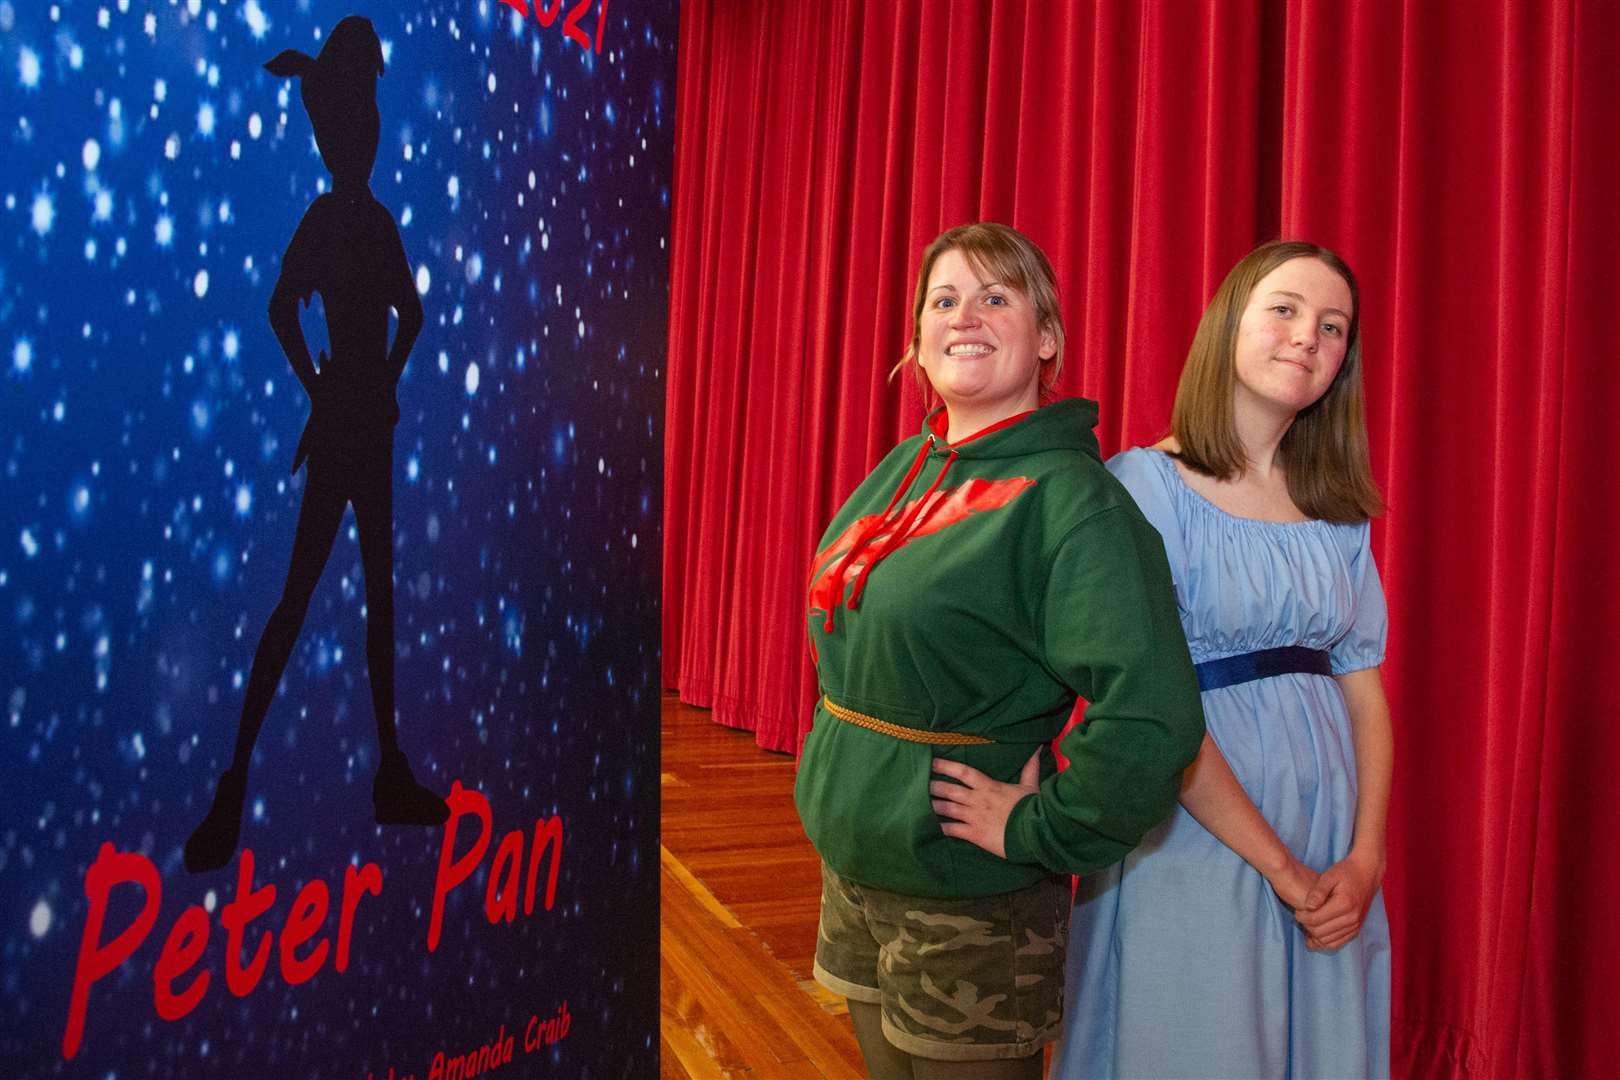 Lee Whitley (Peter Pan) and Robyn Lean (Wendy) from Elgin Amateur Dramatic Society get ready for curtain up tonight of the festive panto Peter Pan in Elgin Town Hall. Picture: Daniel Forsyth